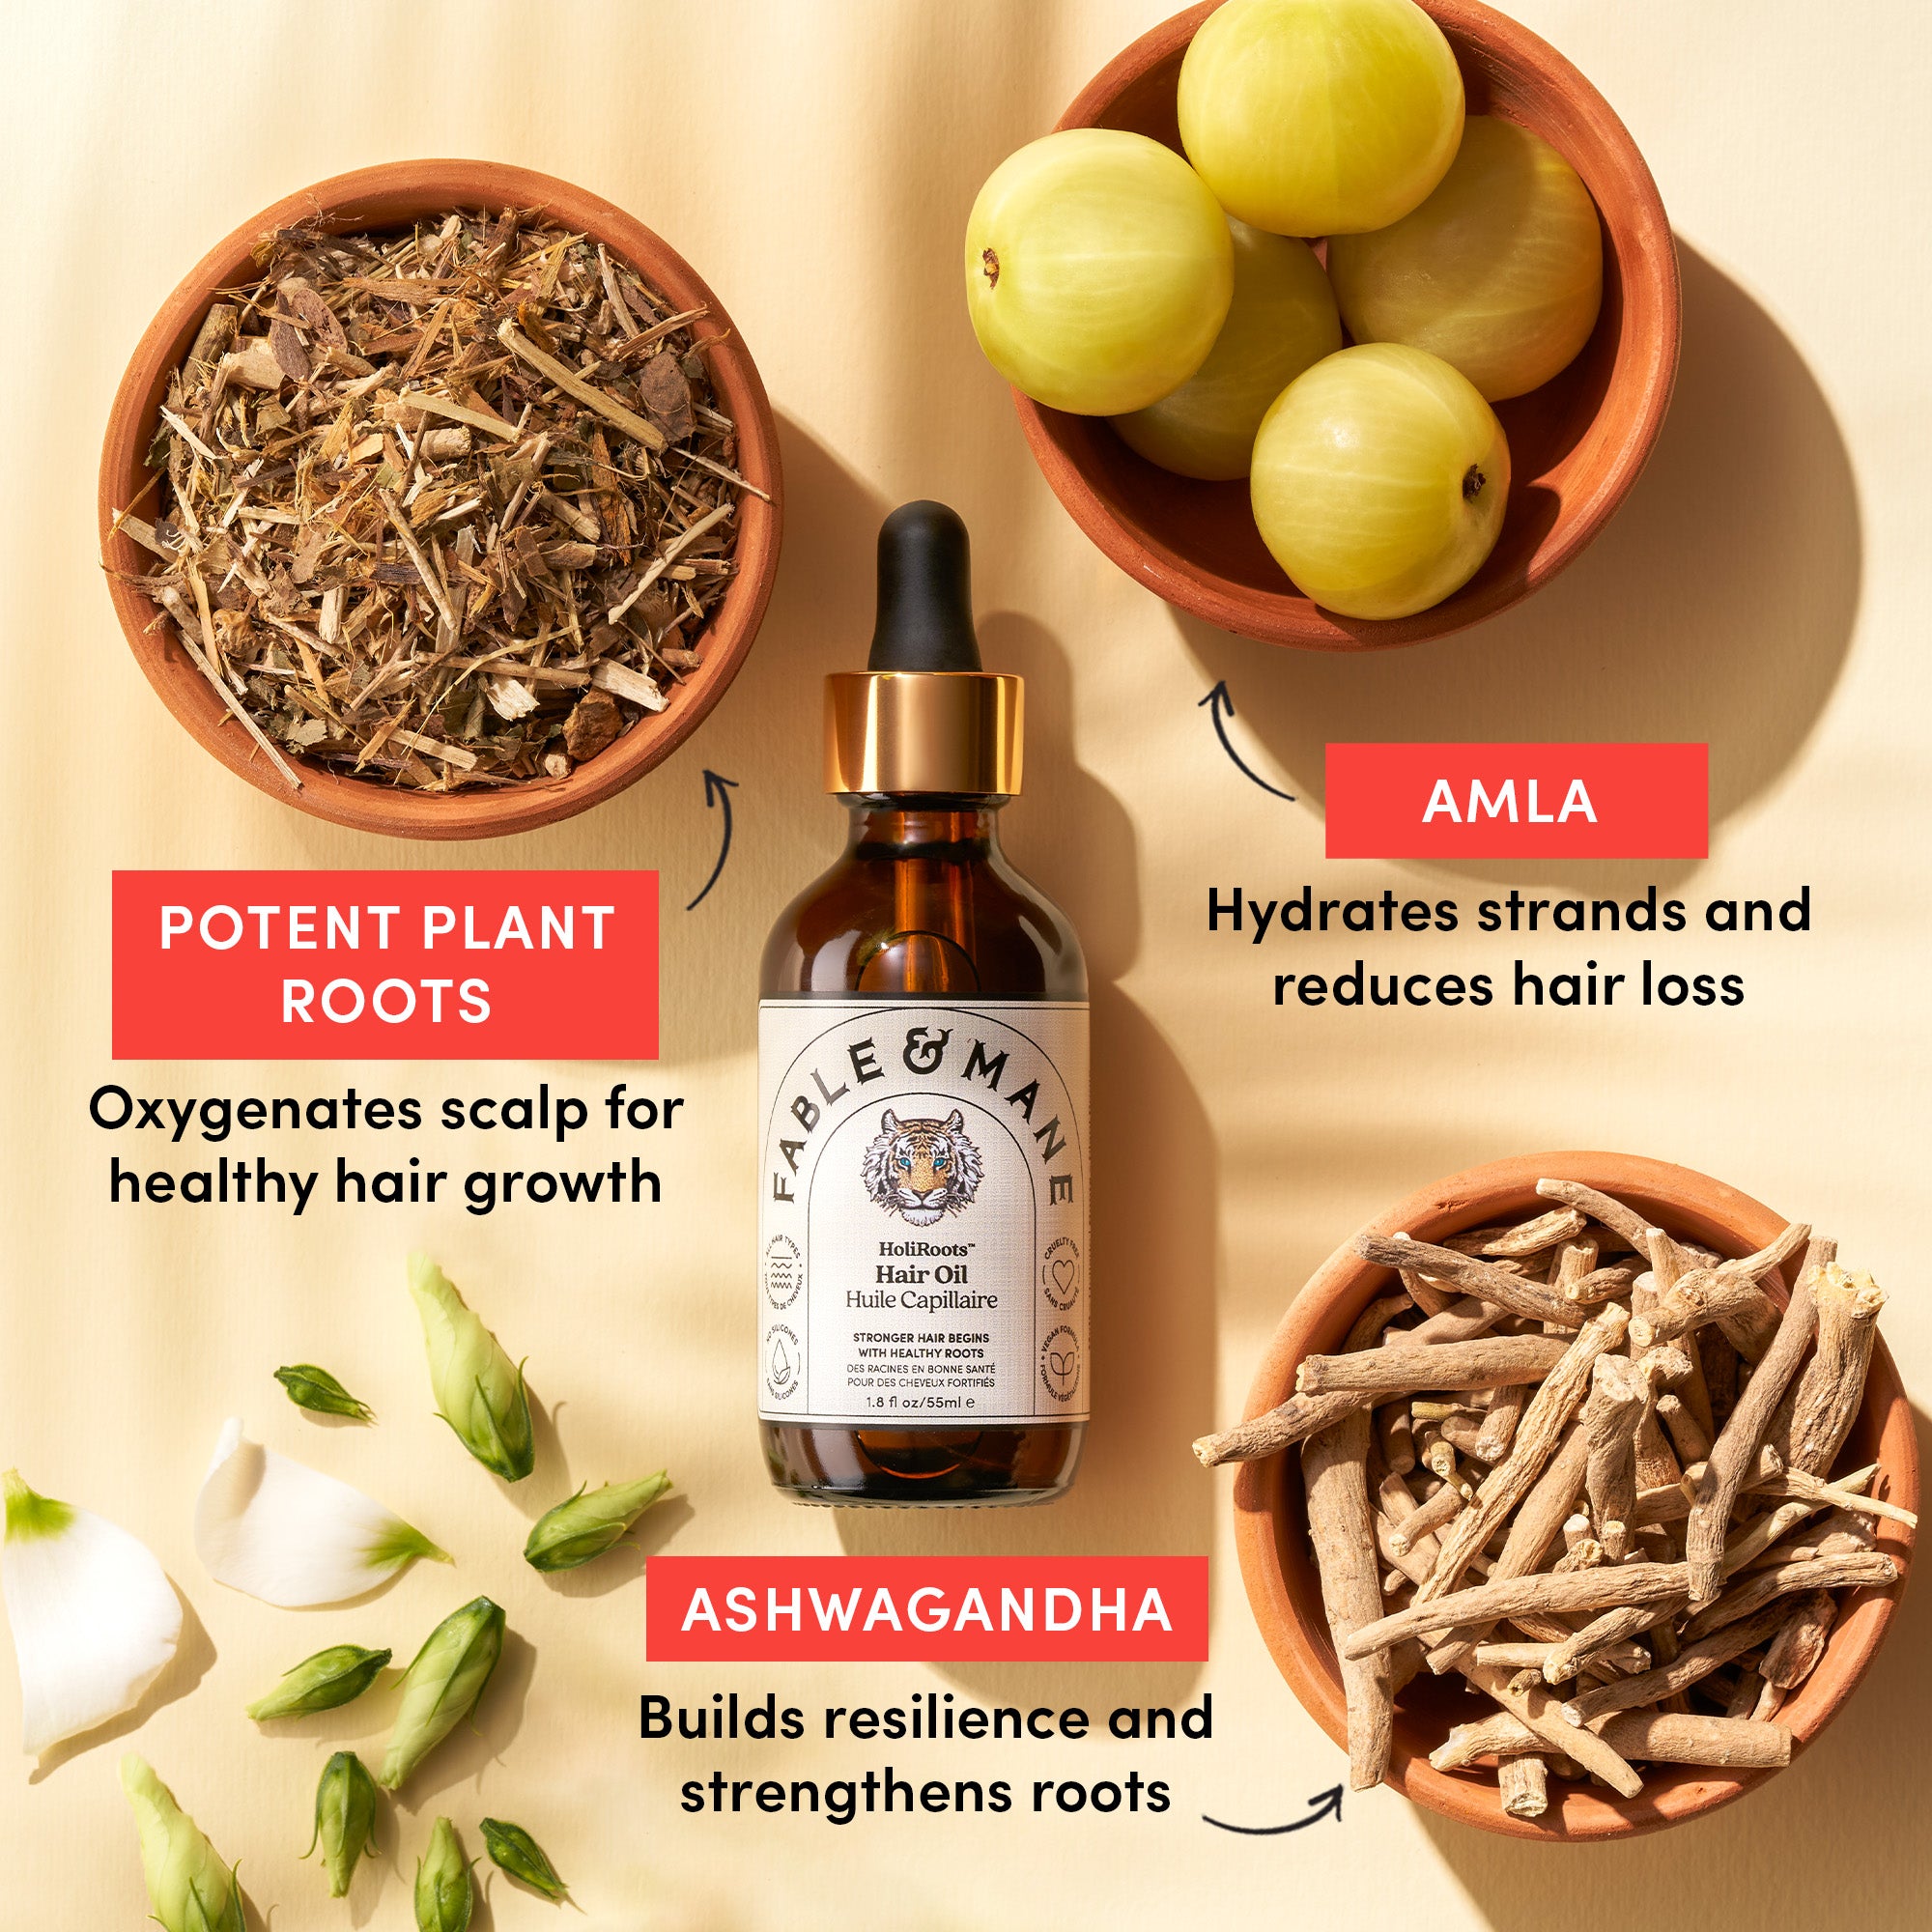 Ashwagandha Benefits for Hair: What Are They? | Care/of